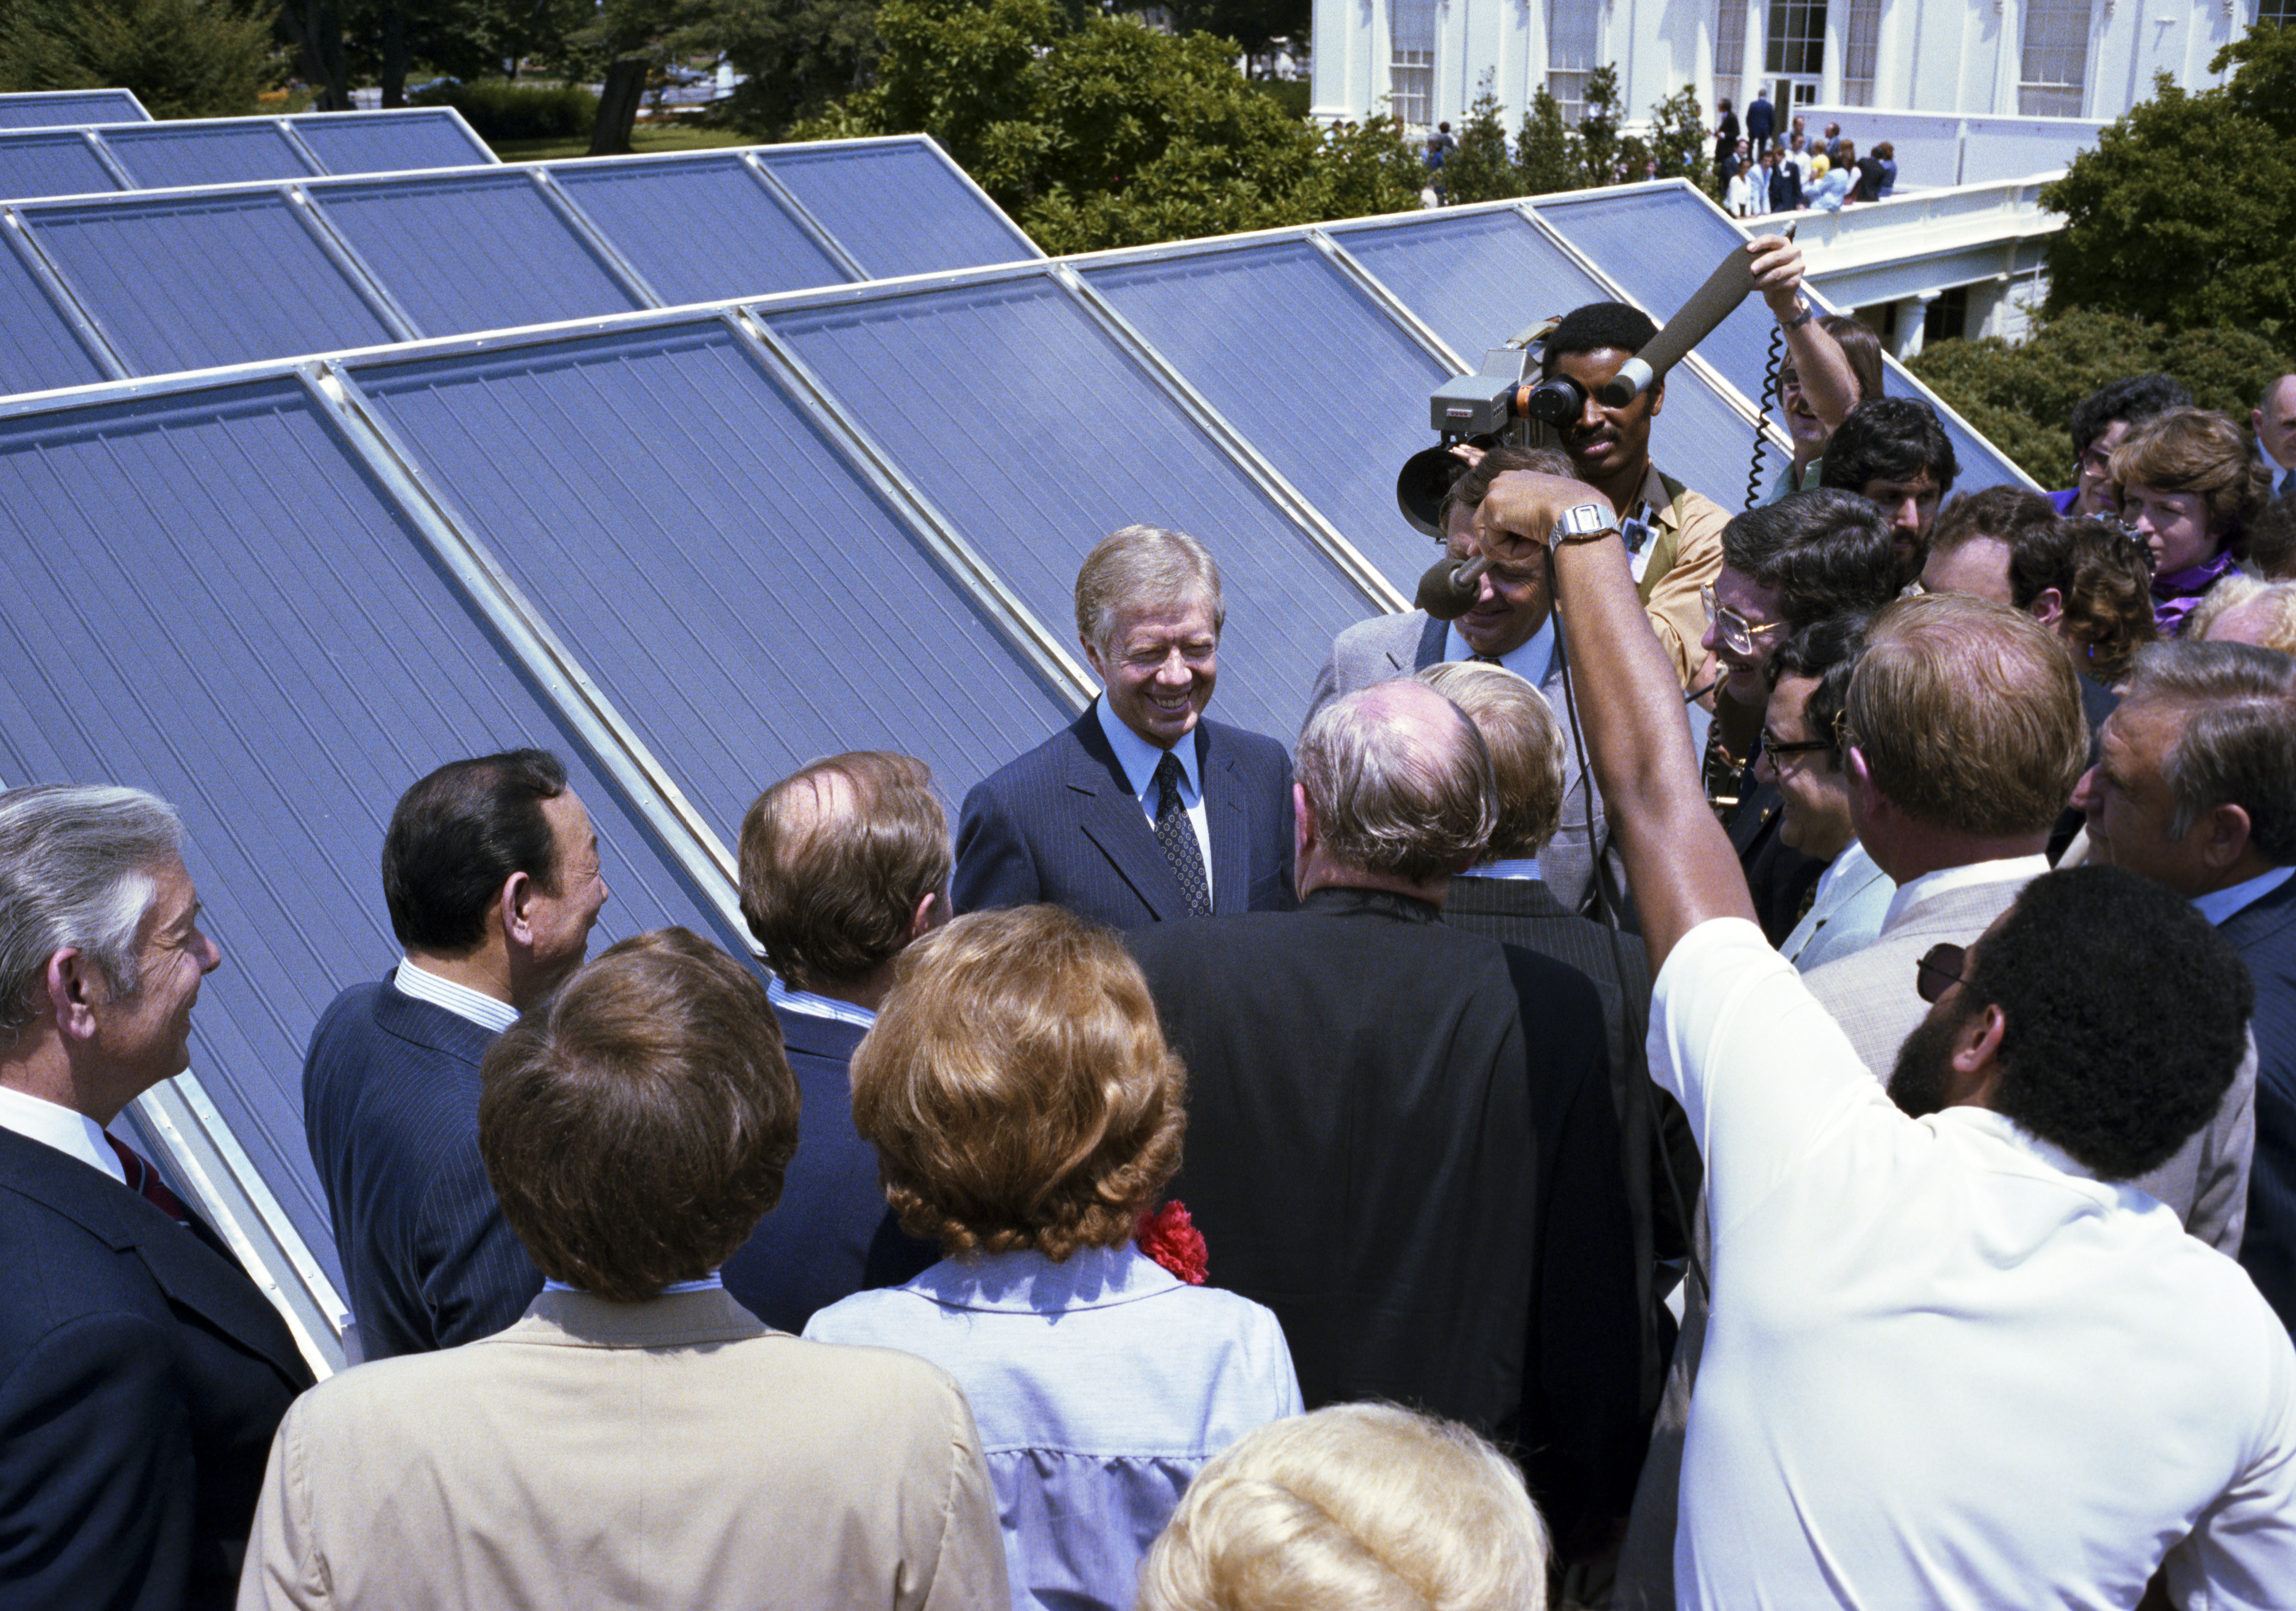 President Jimmy Carter dedicating the solar-thermal panels on the roof of the White House, 20 June 1979.